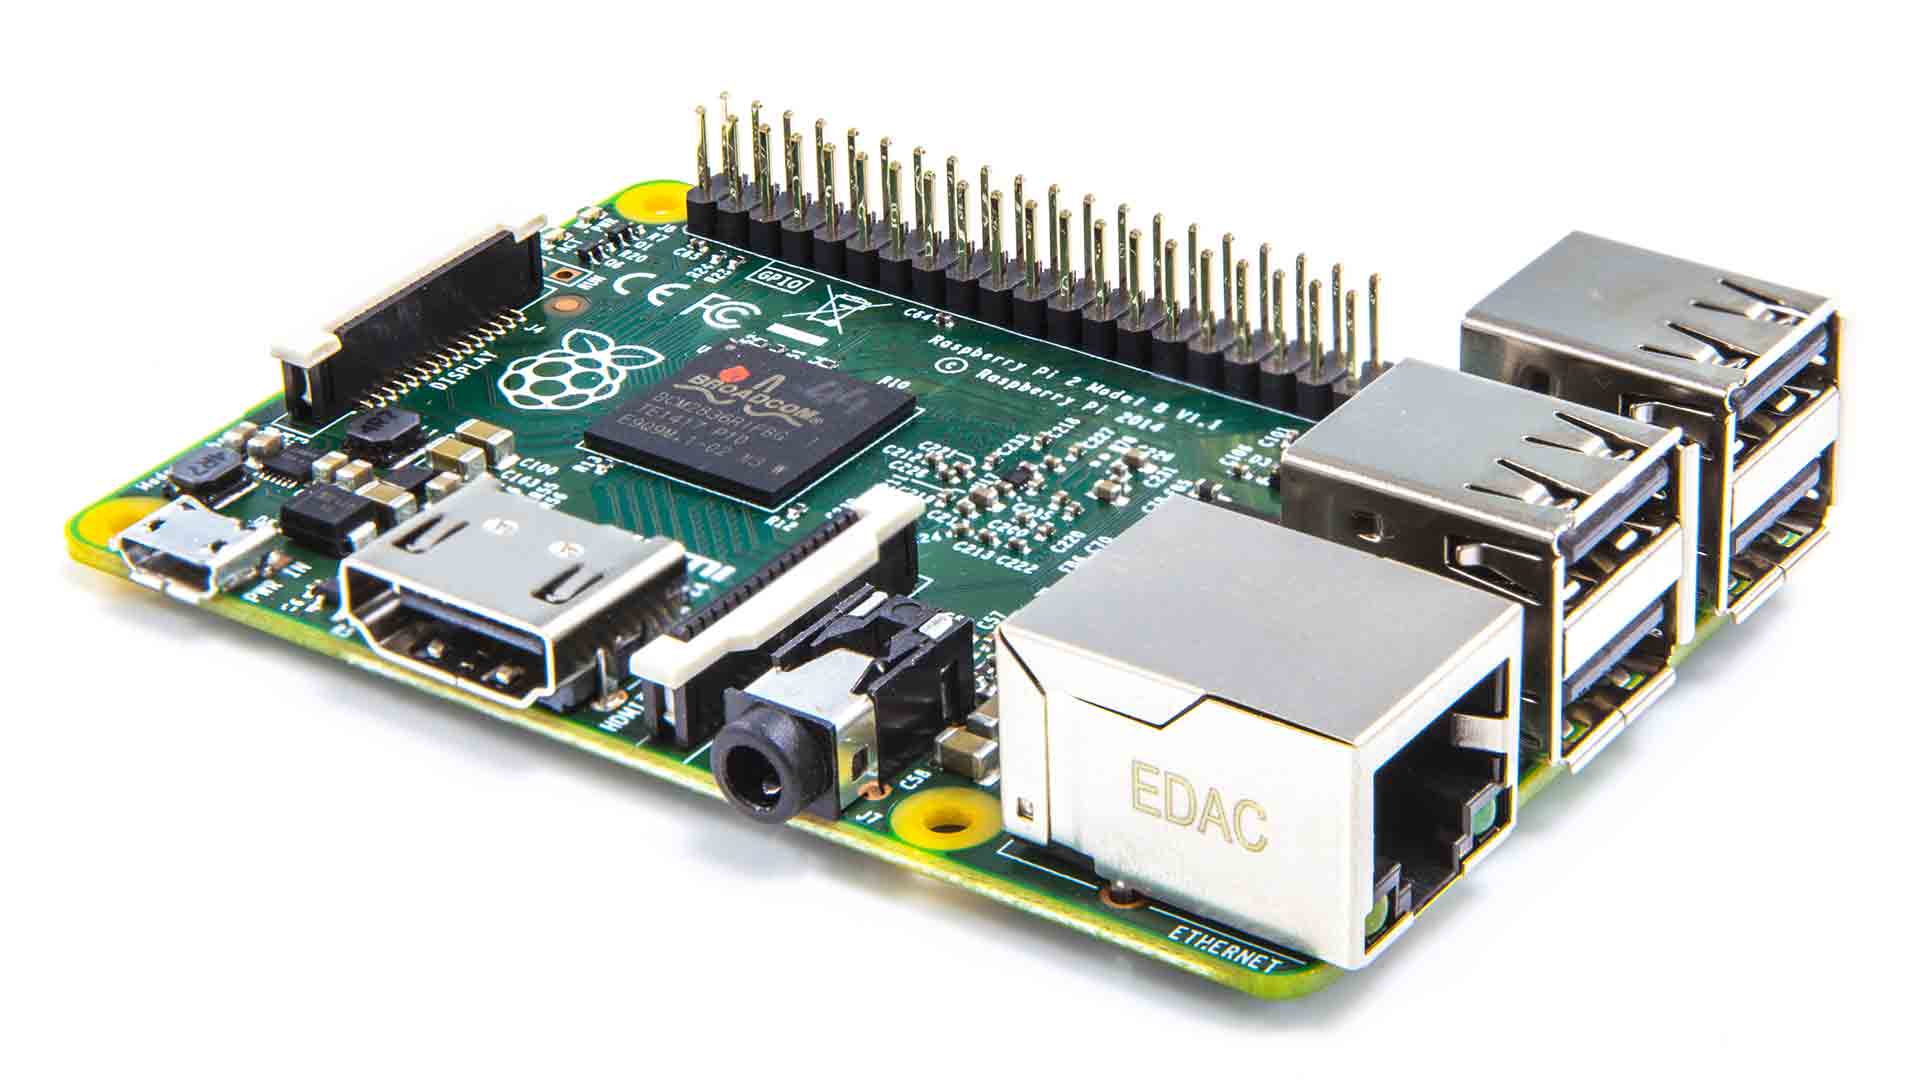 Raspberry Pi 2: A Tiny PC That Packs a Punch